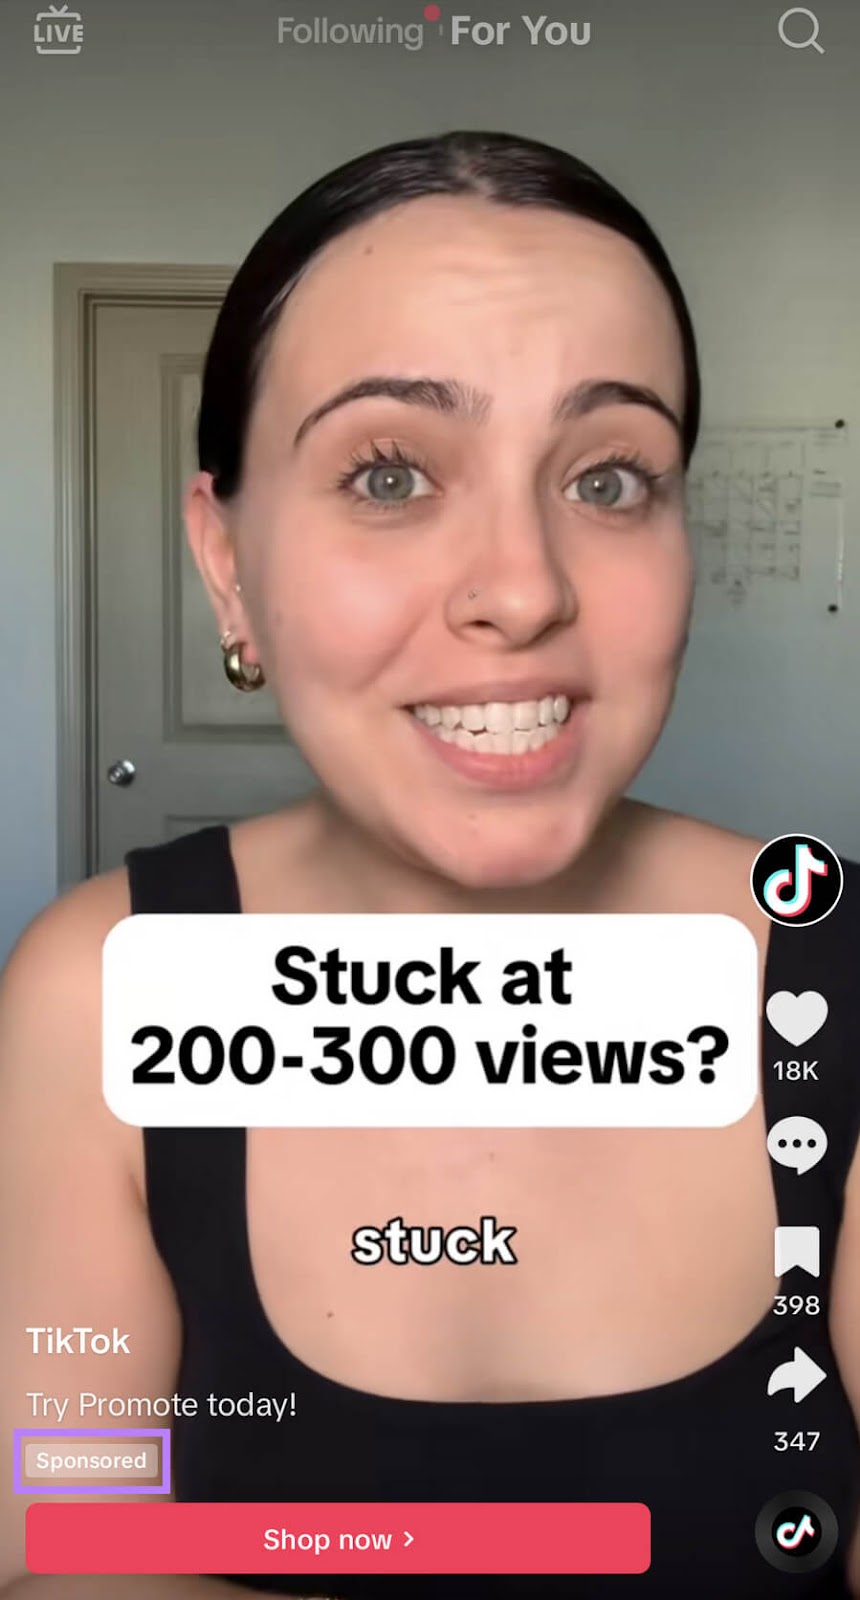 An in-feed advertisement  from TikTok